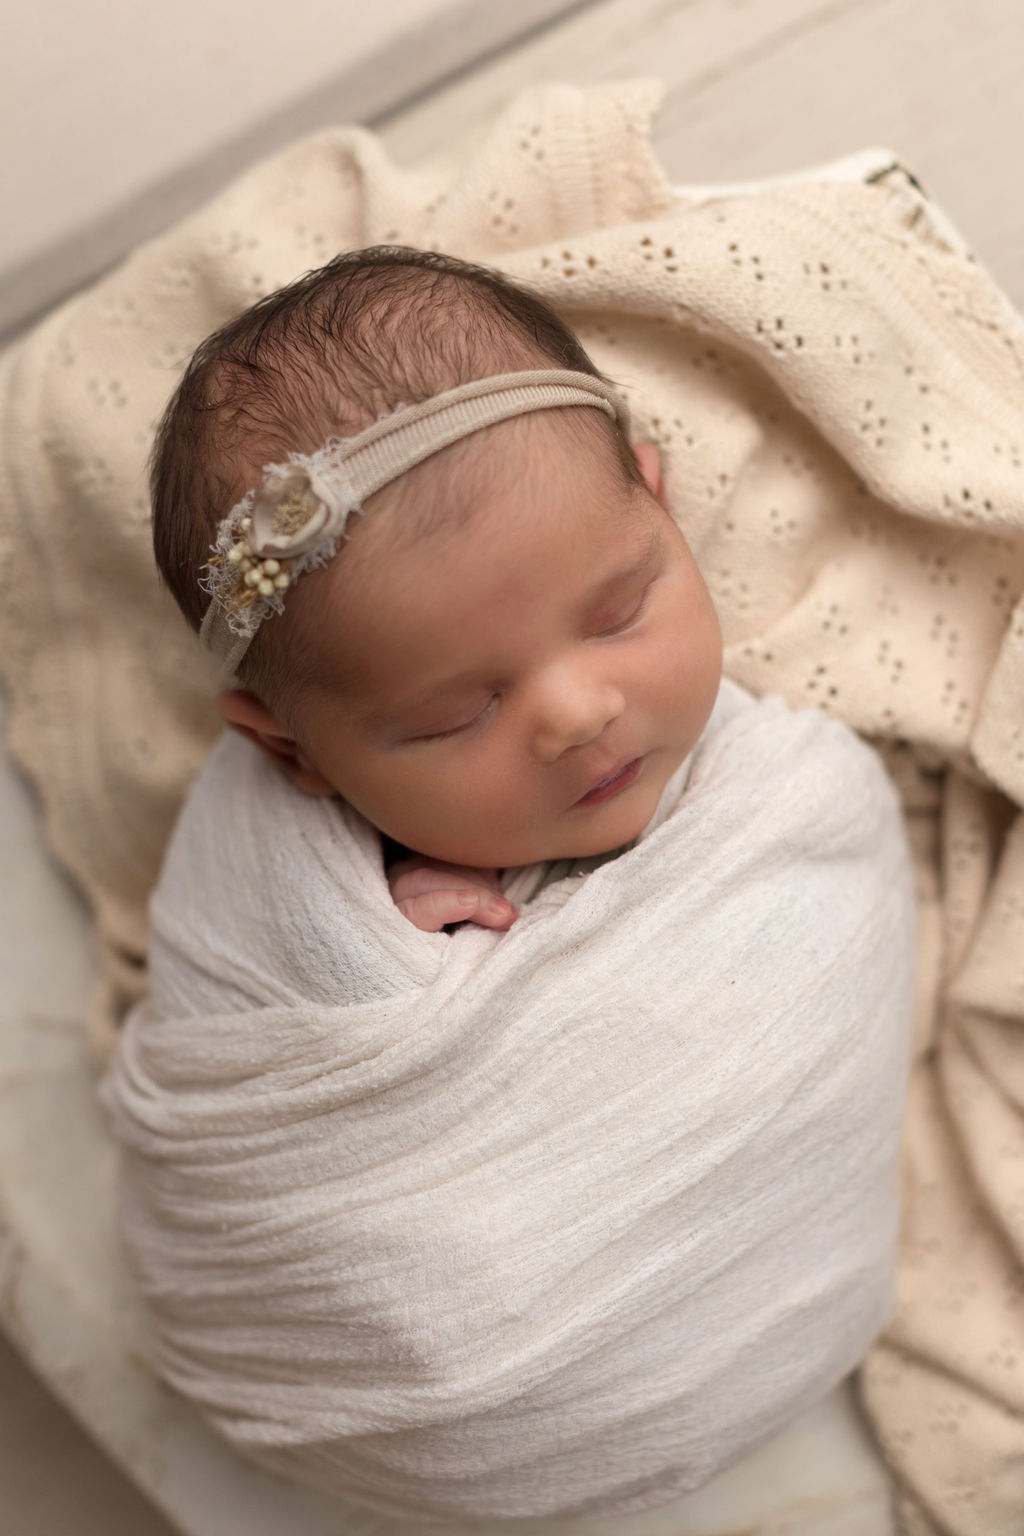 A newborn baby sleeps in a white swaddle on a cream blanket with a headband